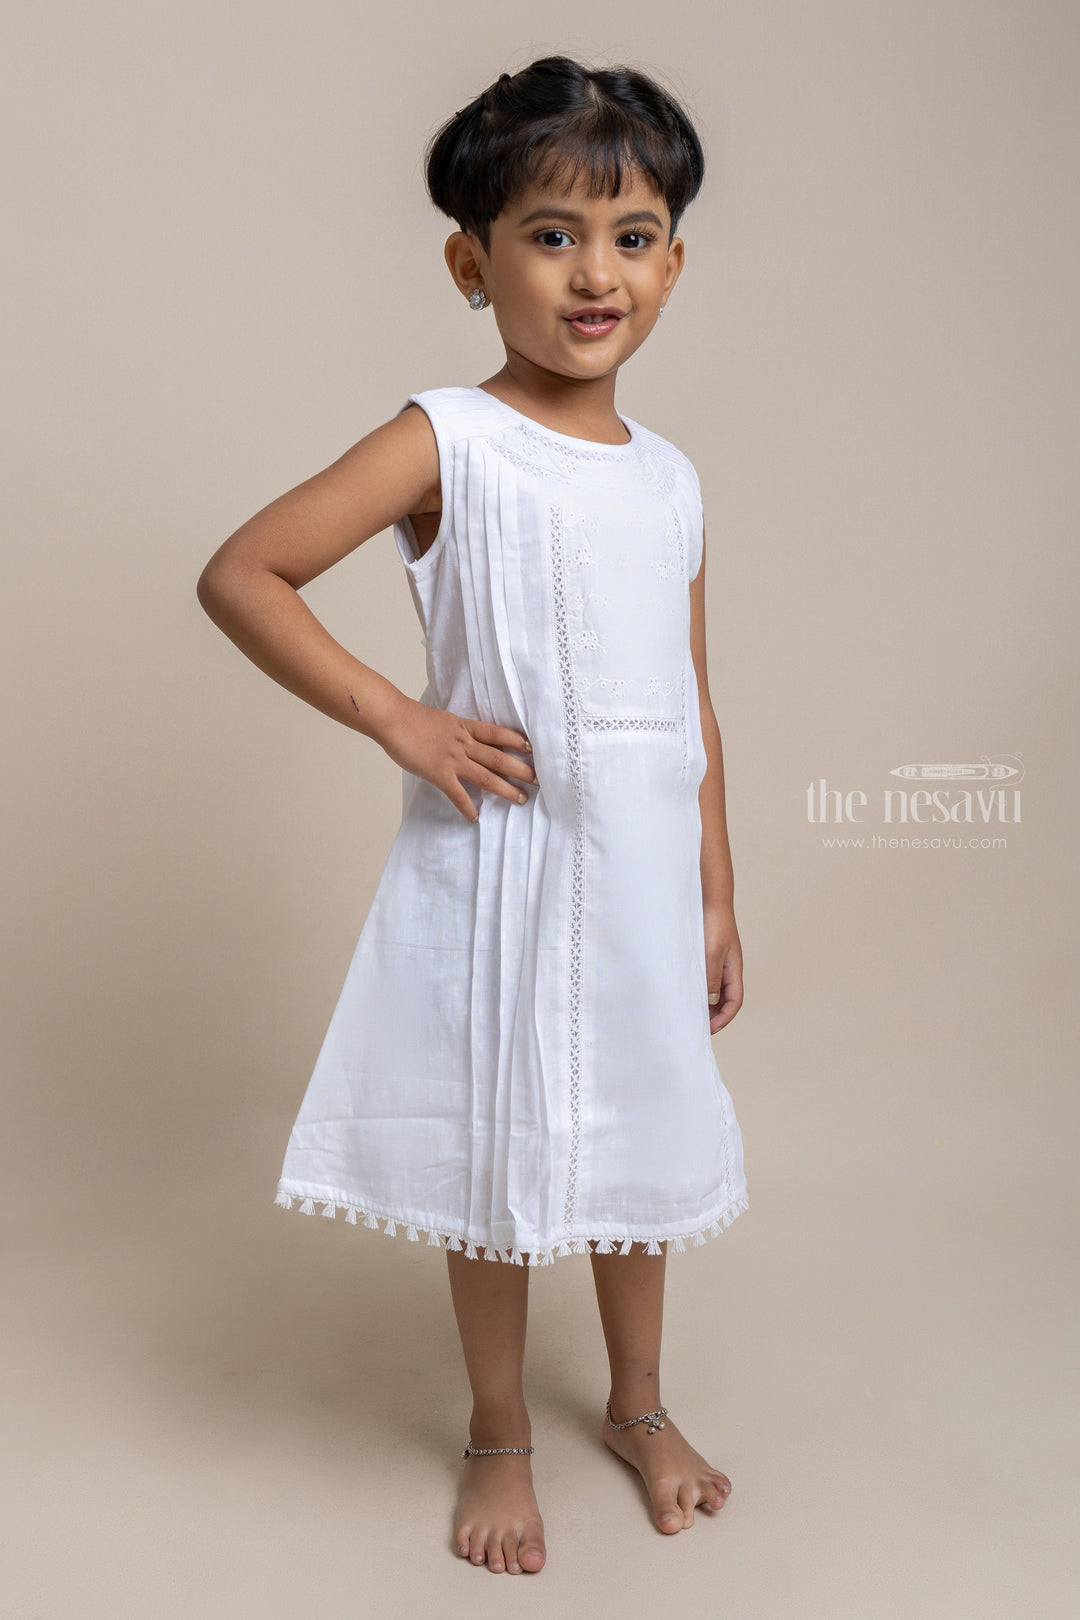 The Nesavu Girls Cotton Frock Beautiful White Floral Designed Sleeveless Cotton Frock for Girls Nesavu Attractive Girls Cotton Frock | Trendy Cotton Frock | The Nesavu